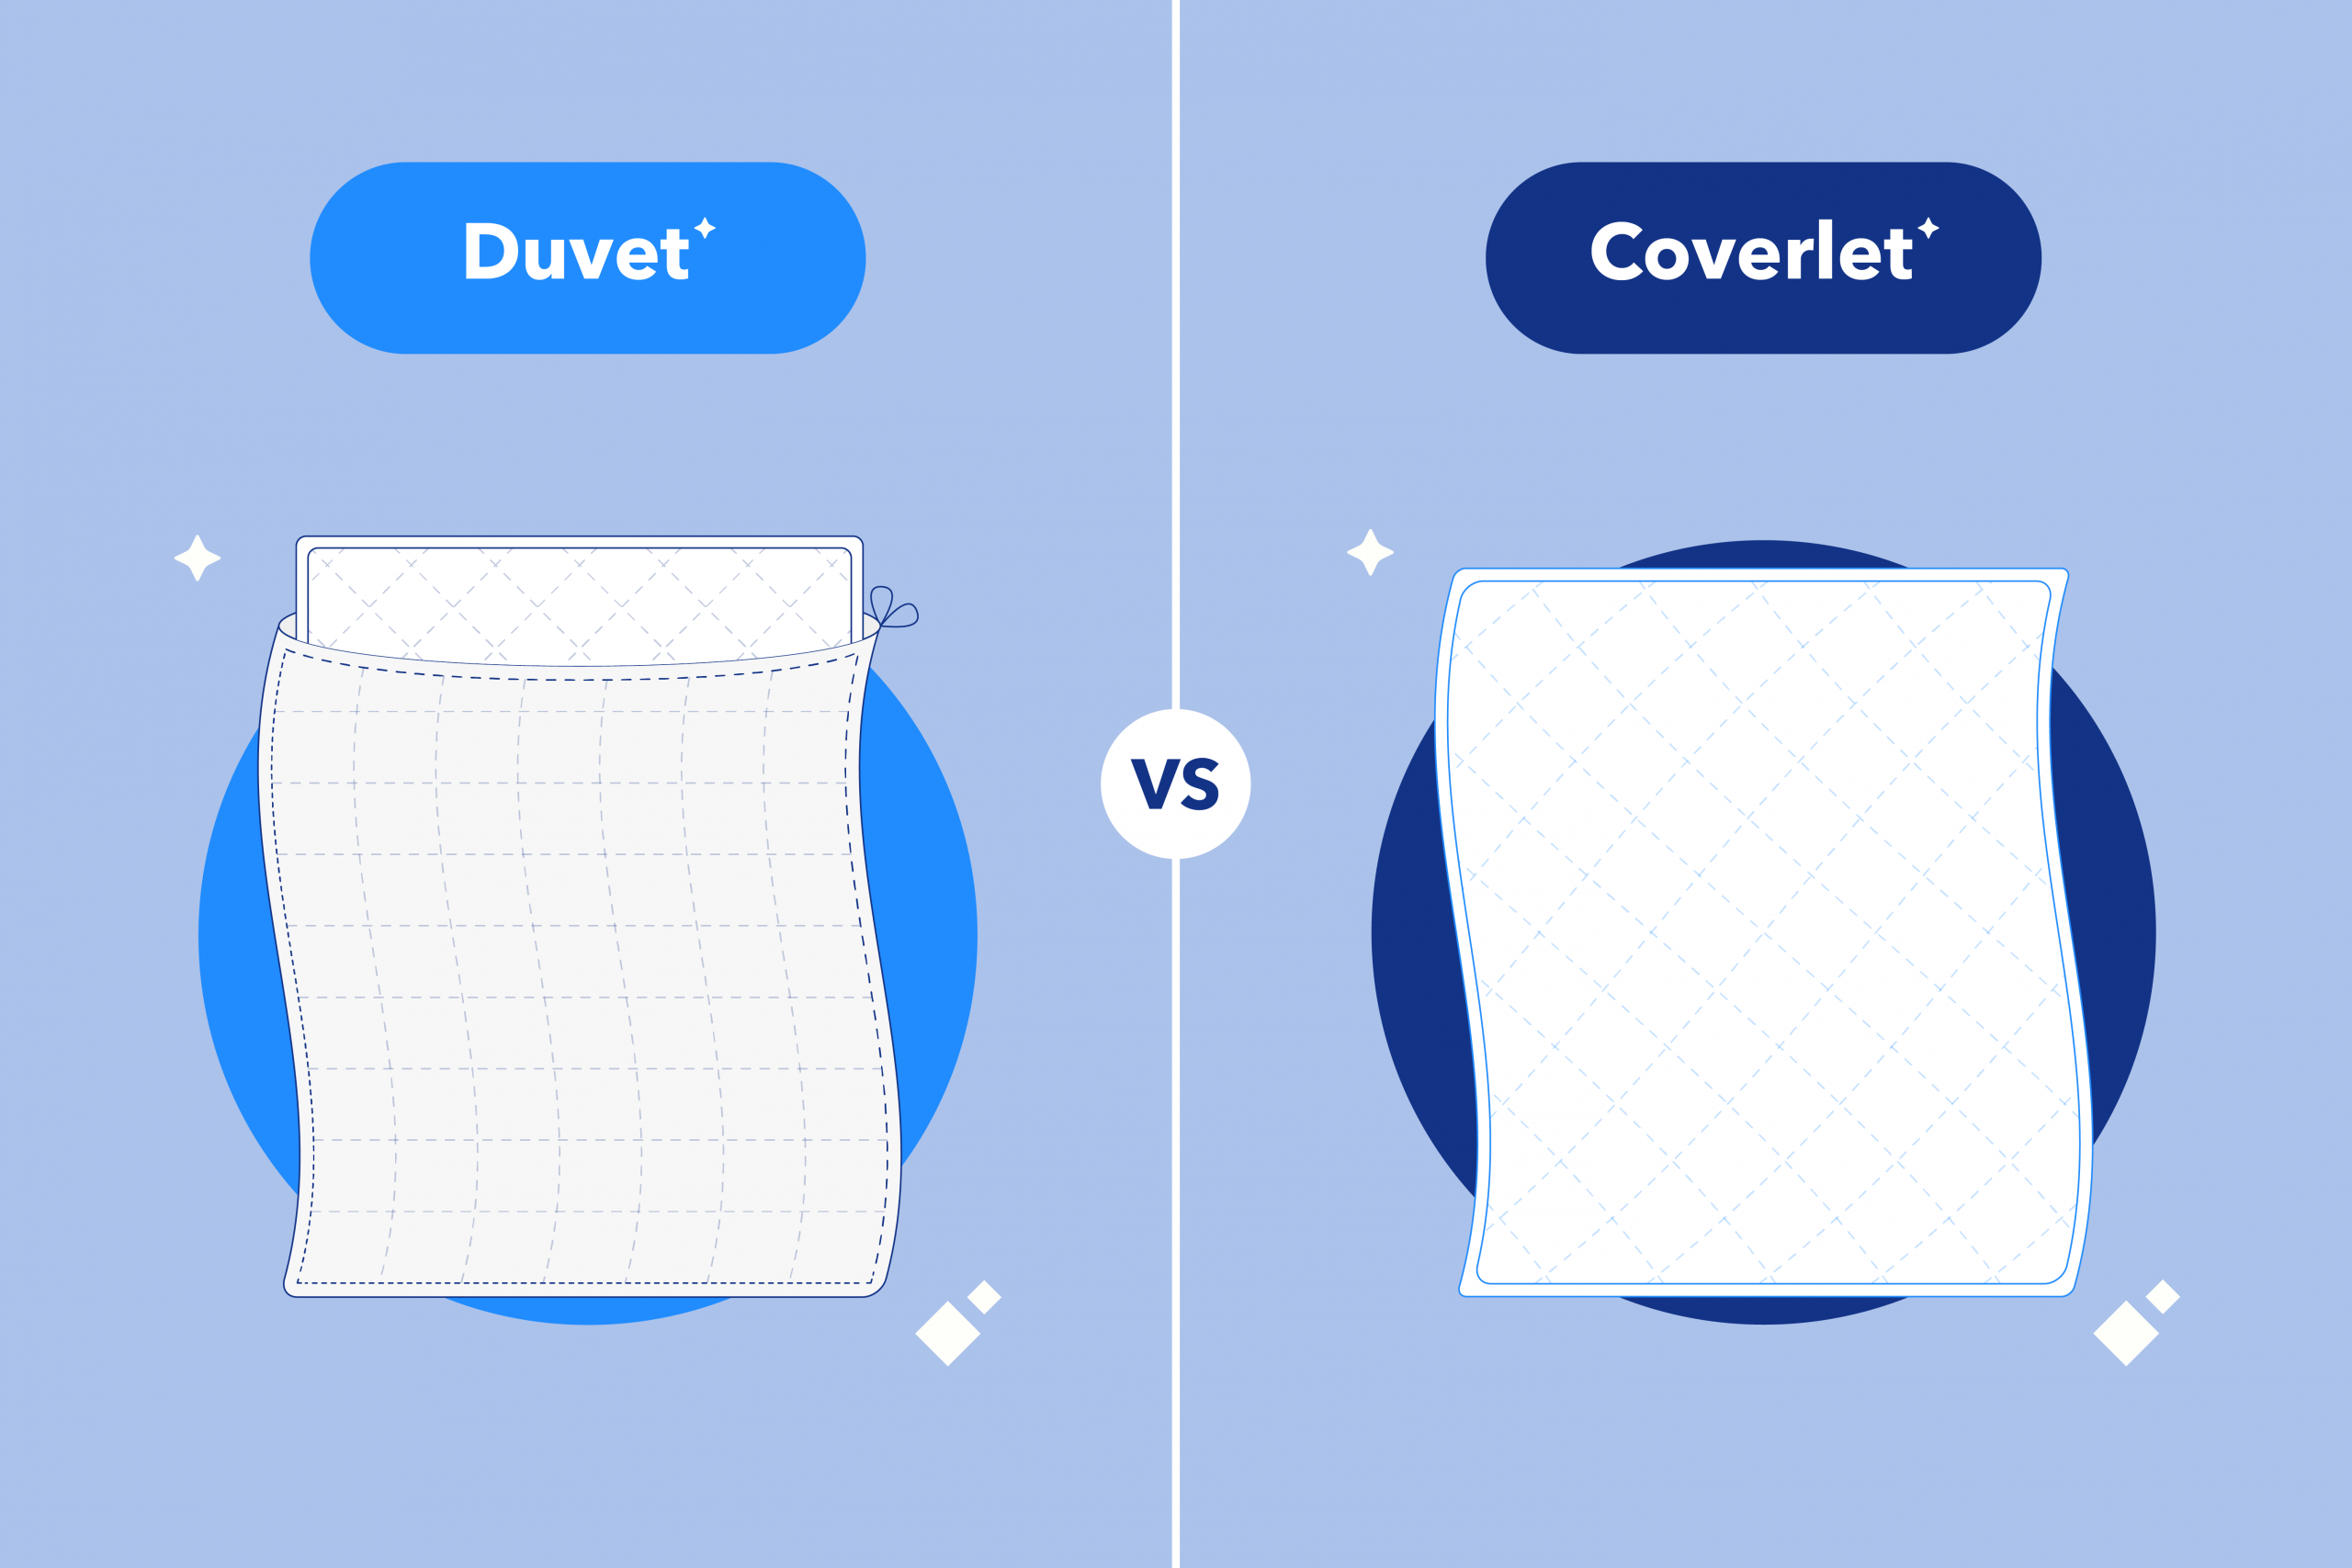 Duvet vs Coverlet: What’s the Difference?